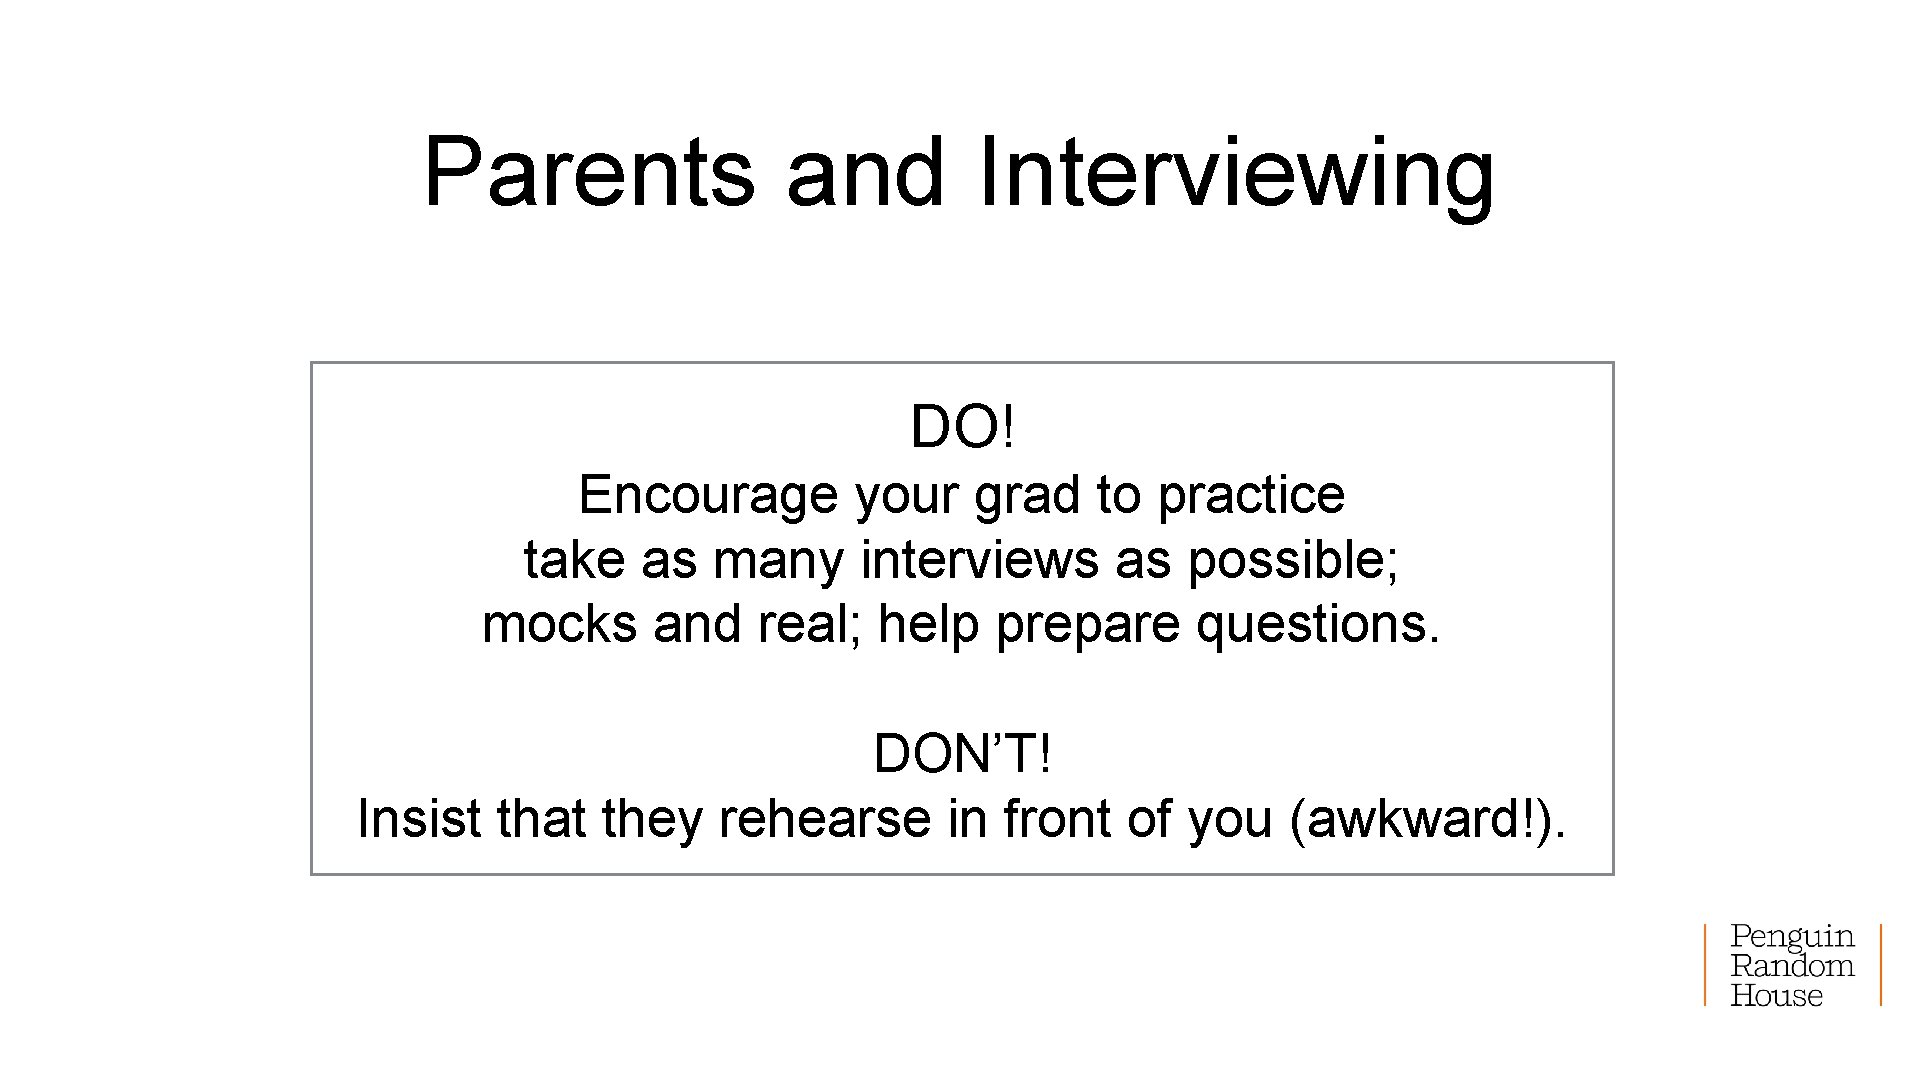 Parents and Interviewing DO! Encourage your grad to practice take as many interviews as